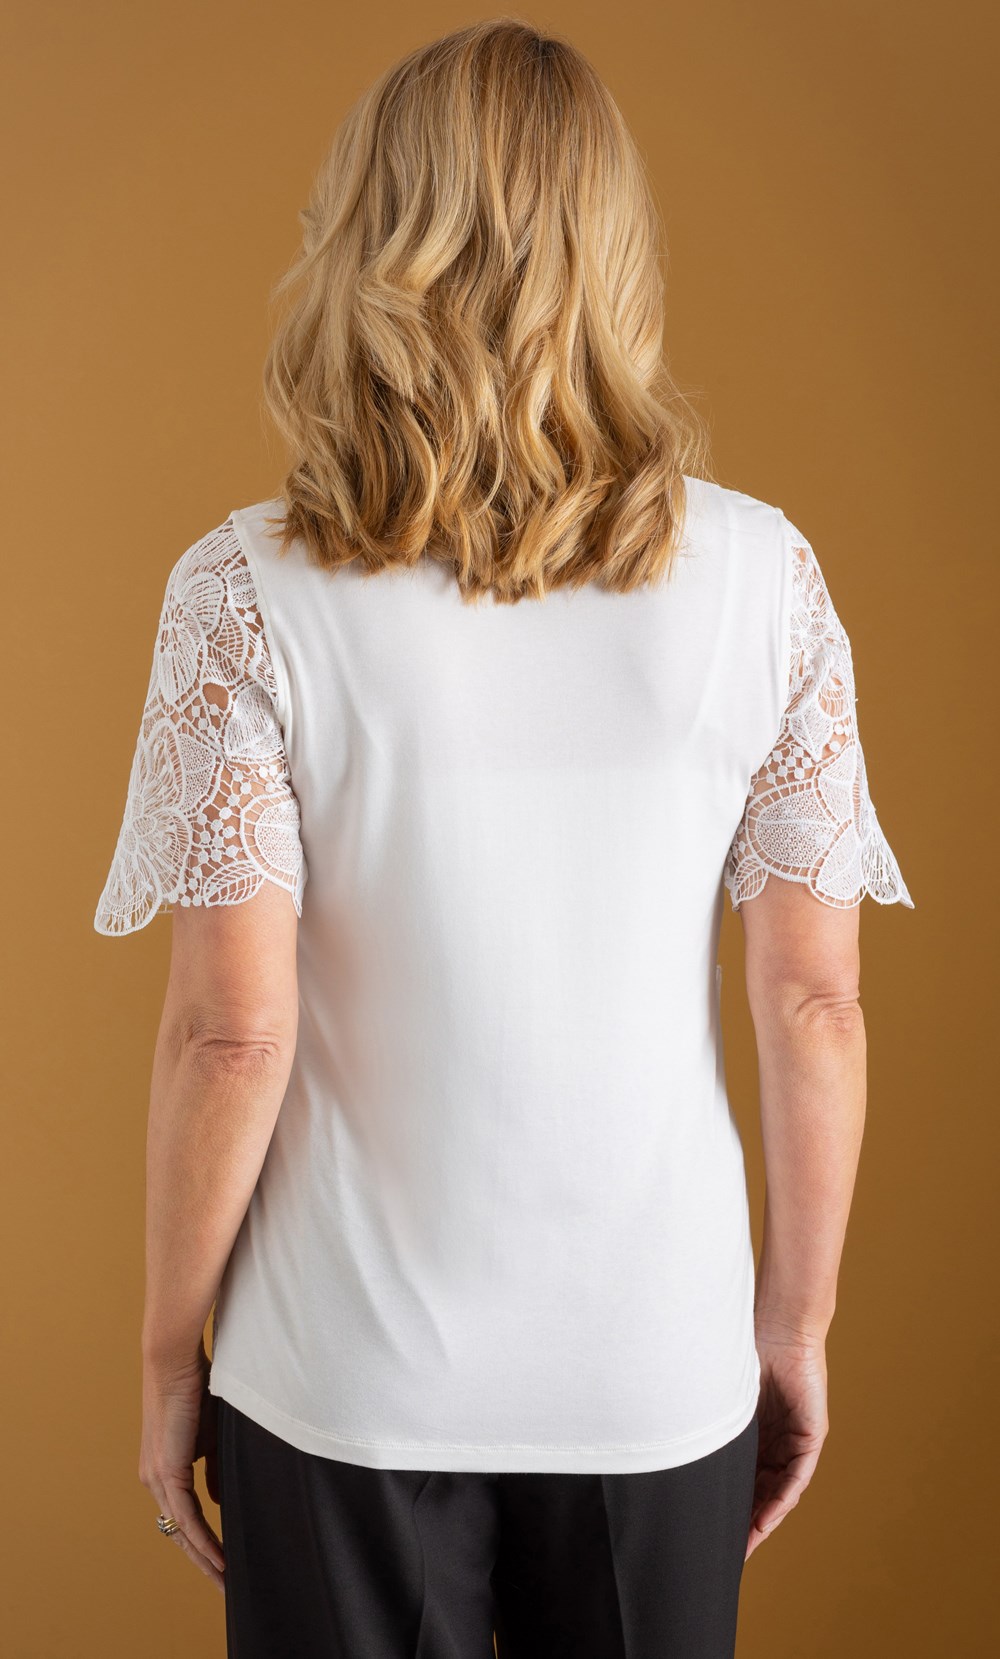 Anna Rose Crochet Lace Top